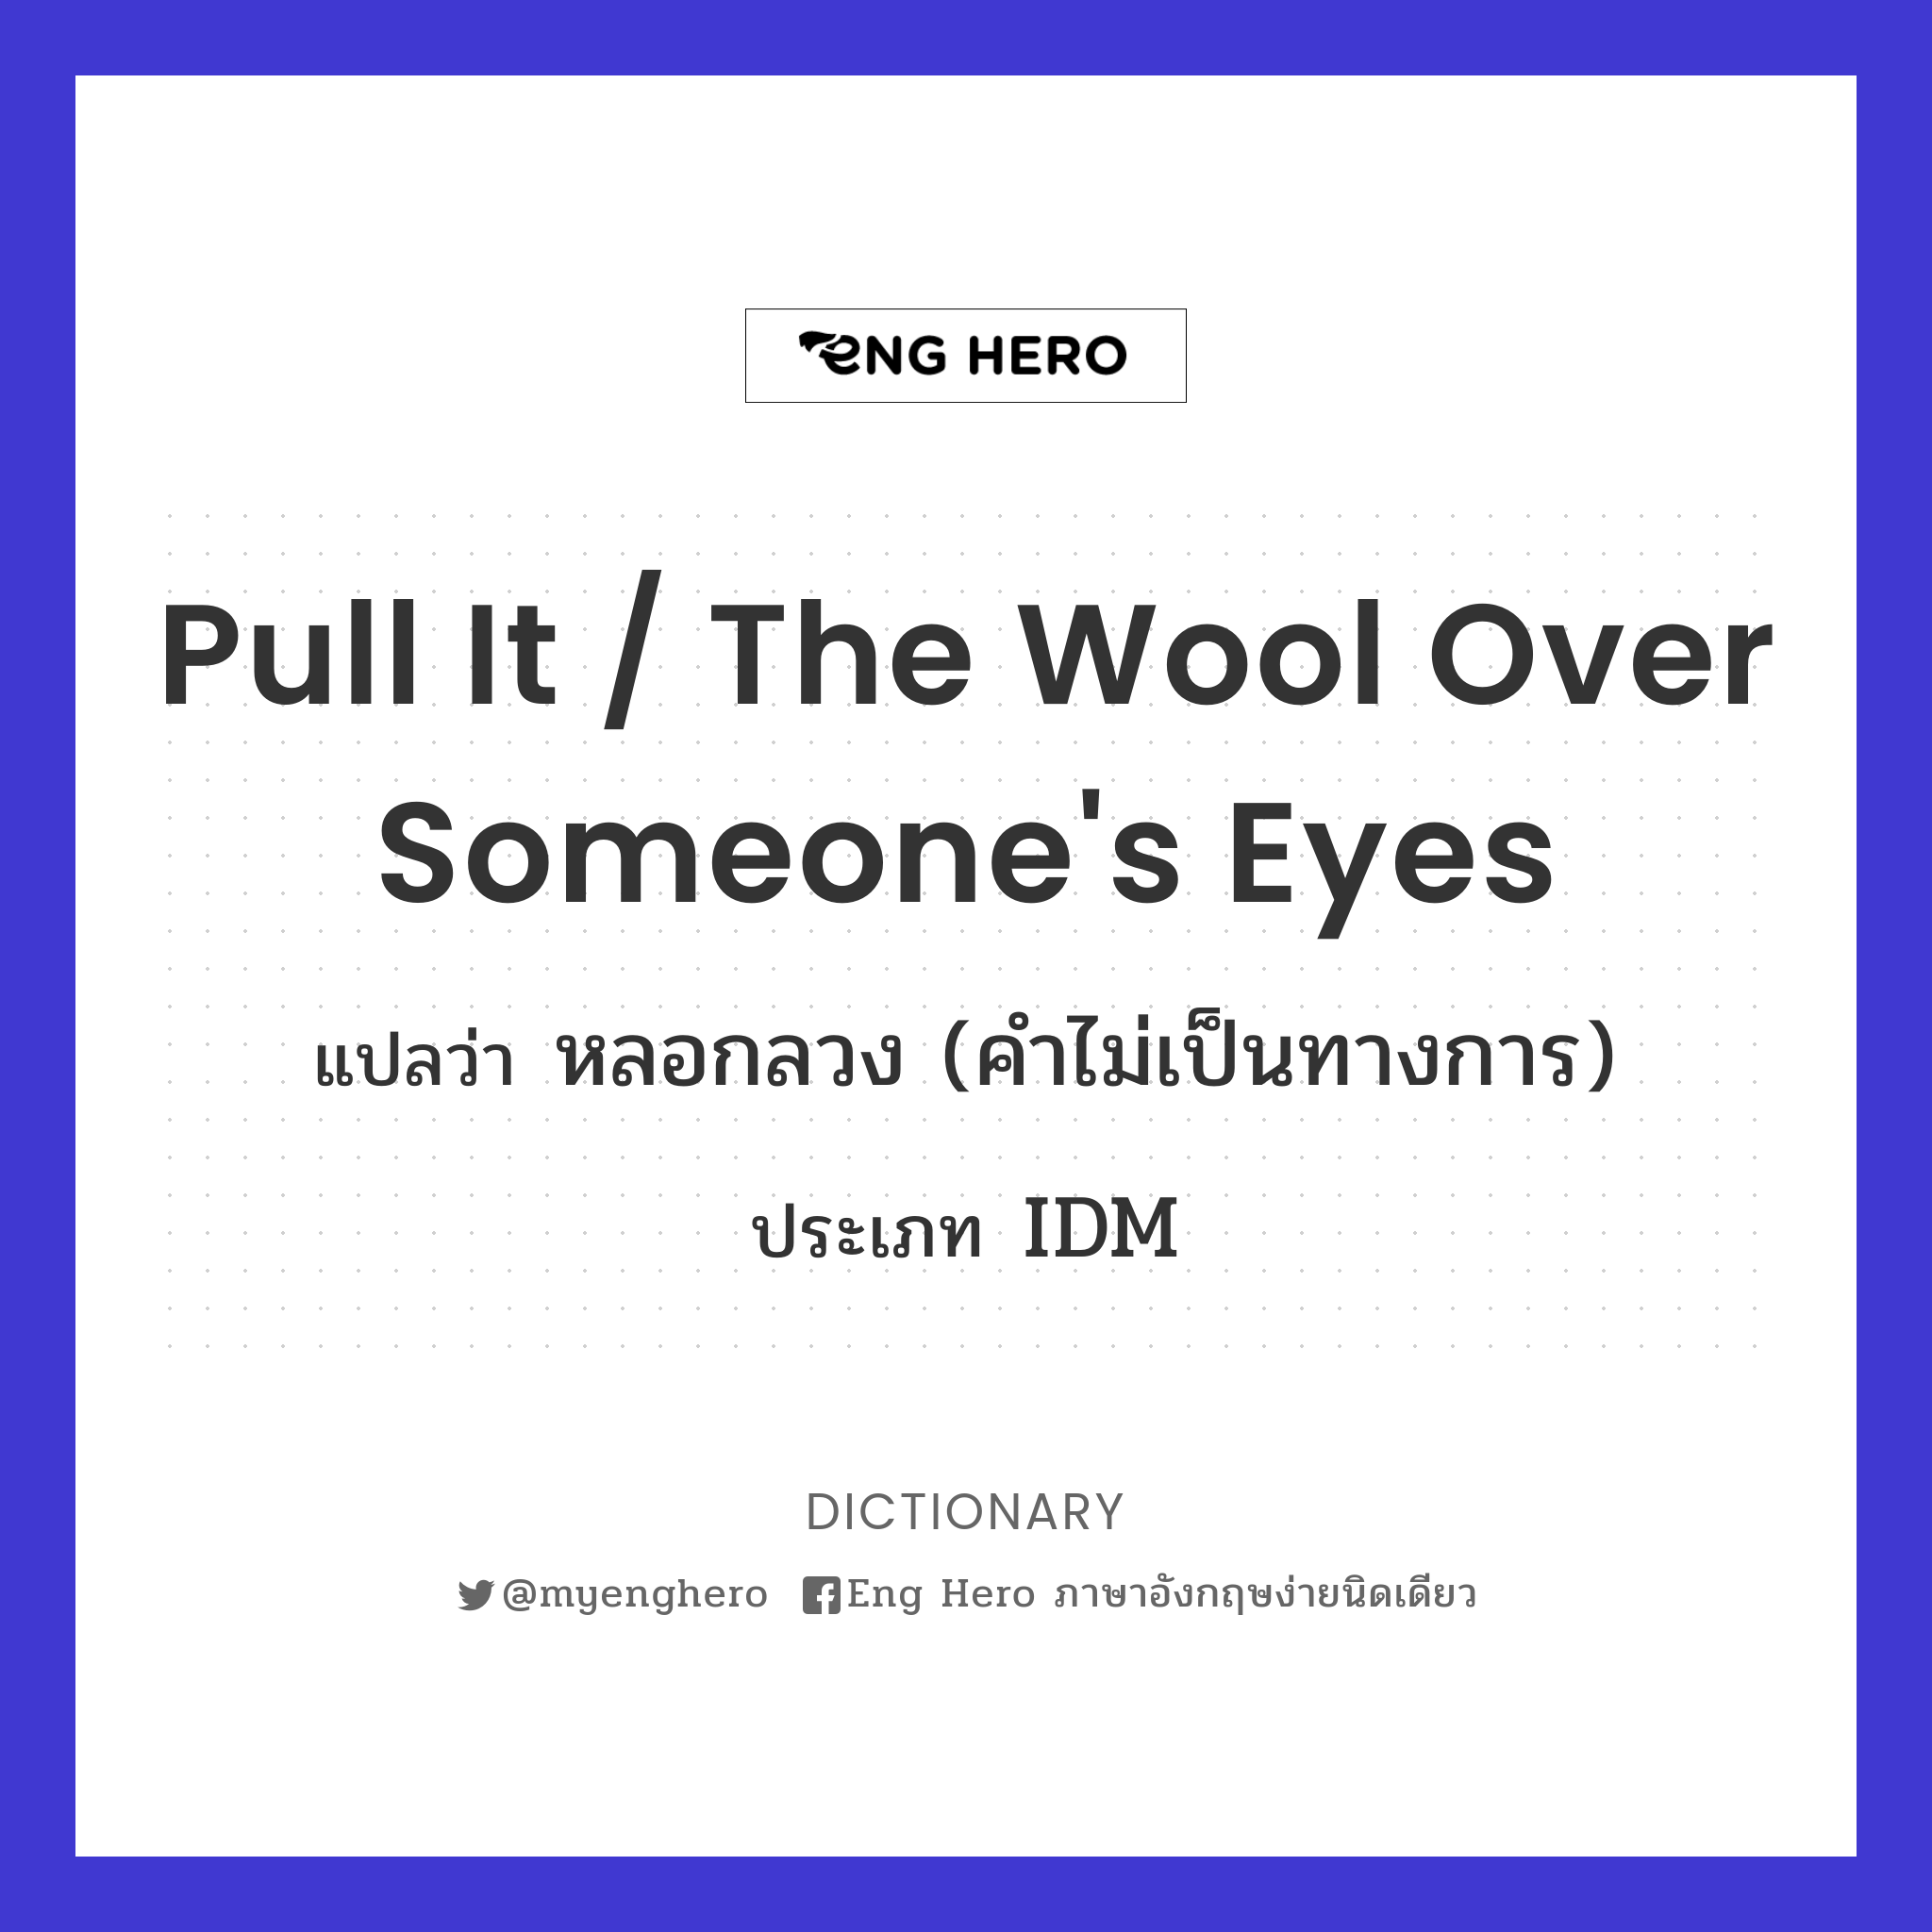 pull it / the wool over someone's eyes